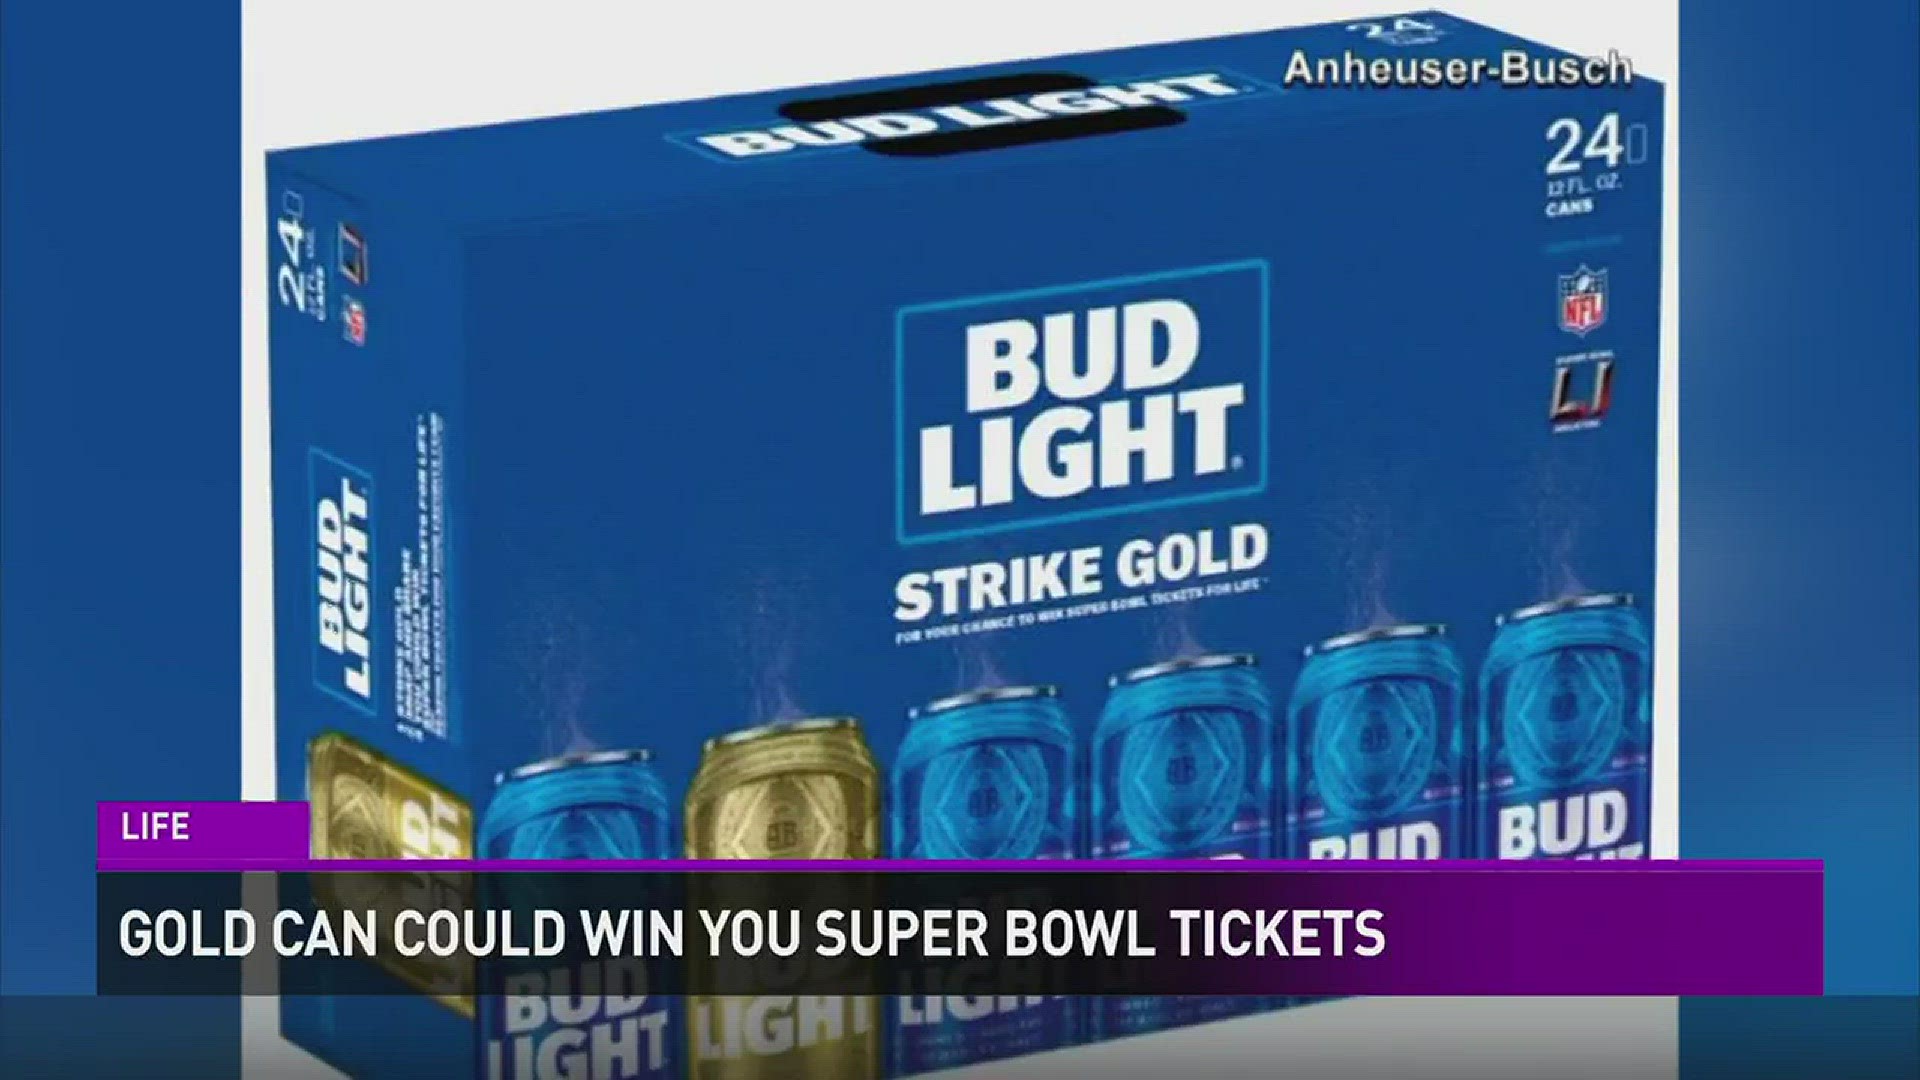 A gold can in a Bud Light pack could win you Super Bowl tickets for life.